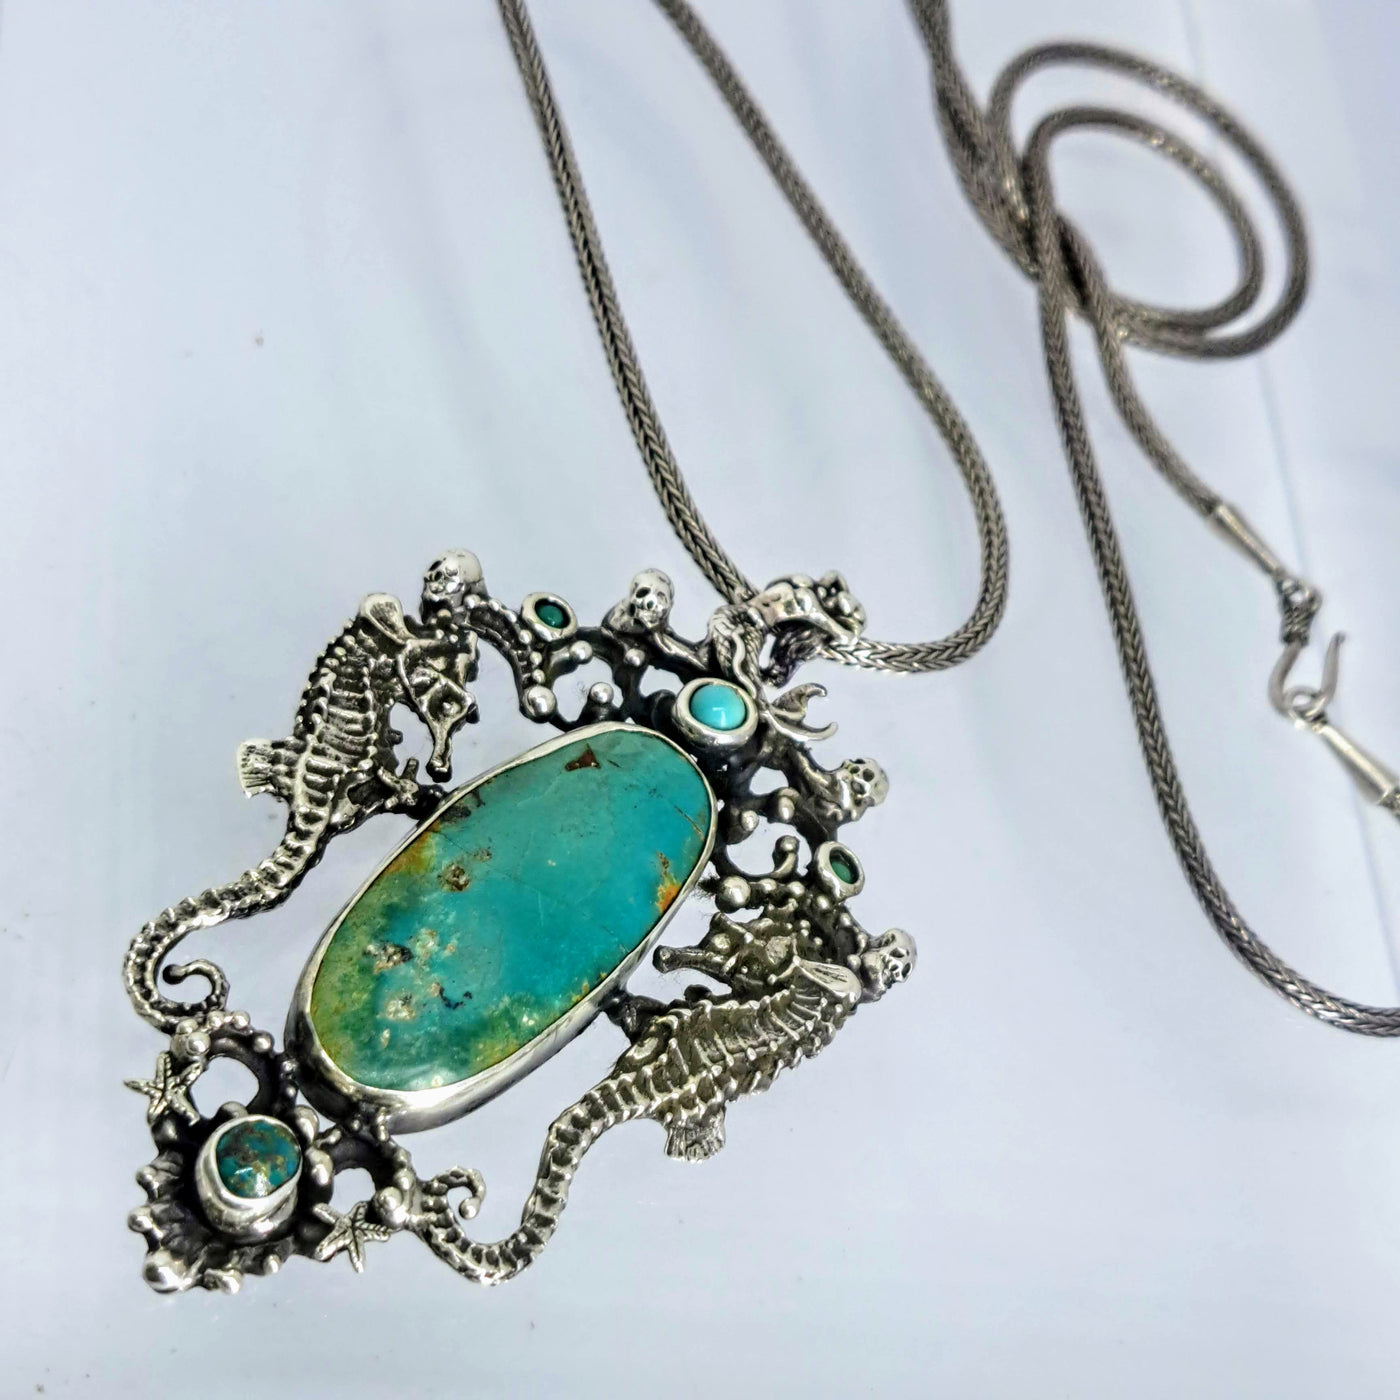 "Dead Men Tell No Tales" Pendant Necklace - Turquoise, Sterling